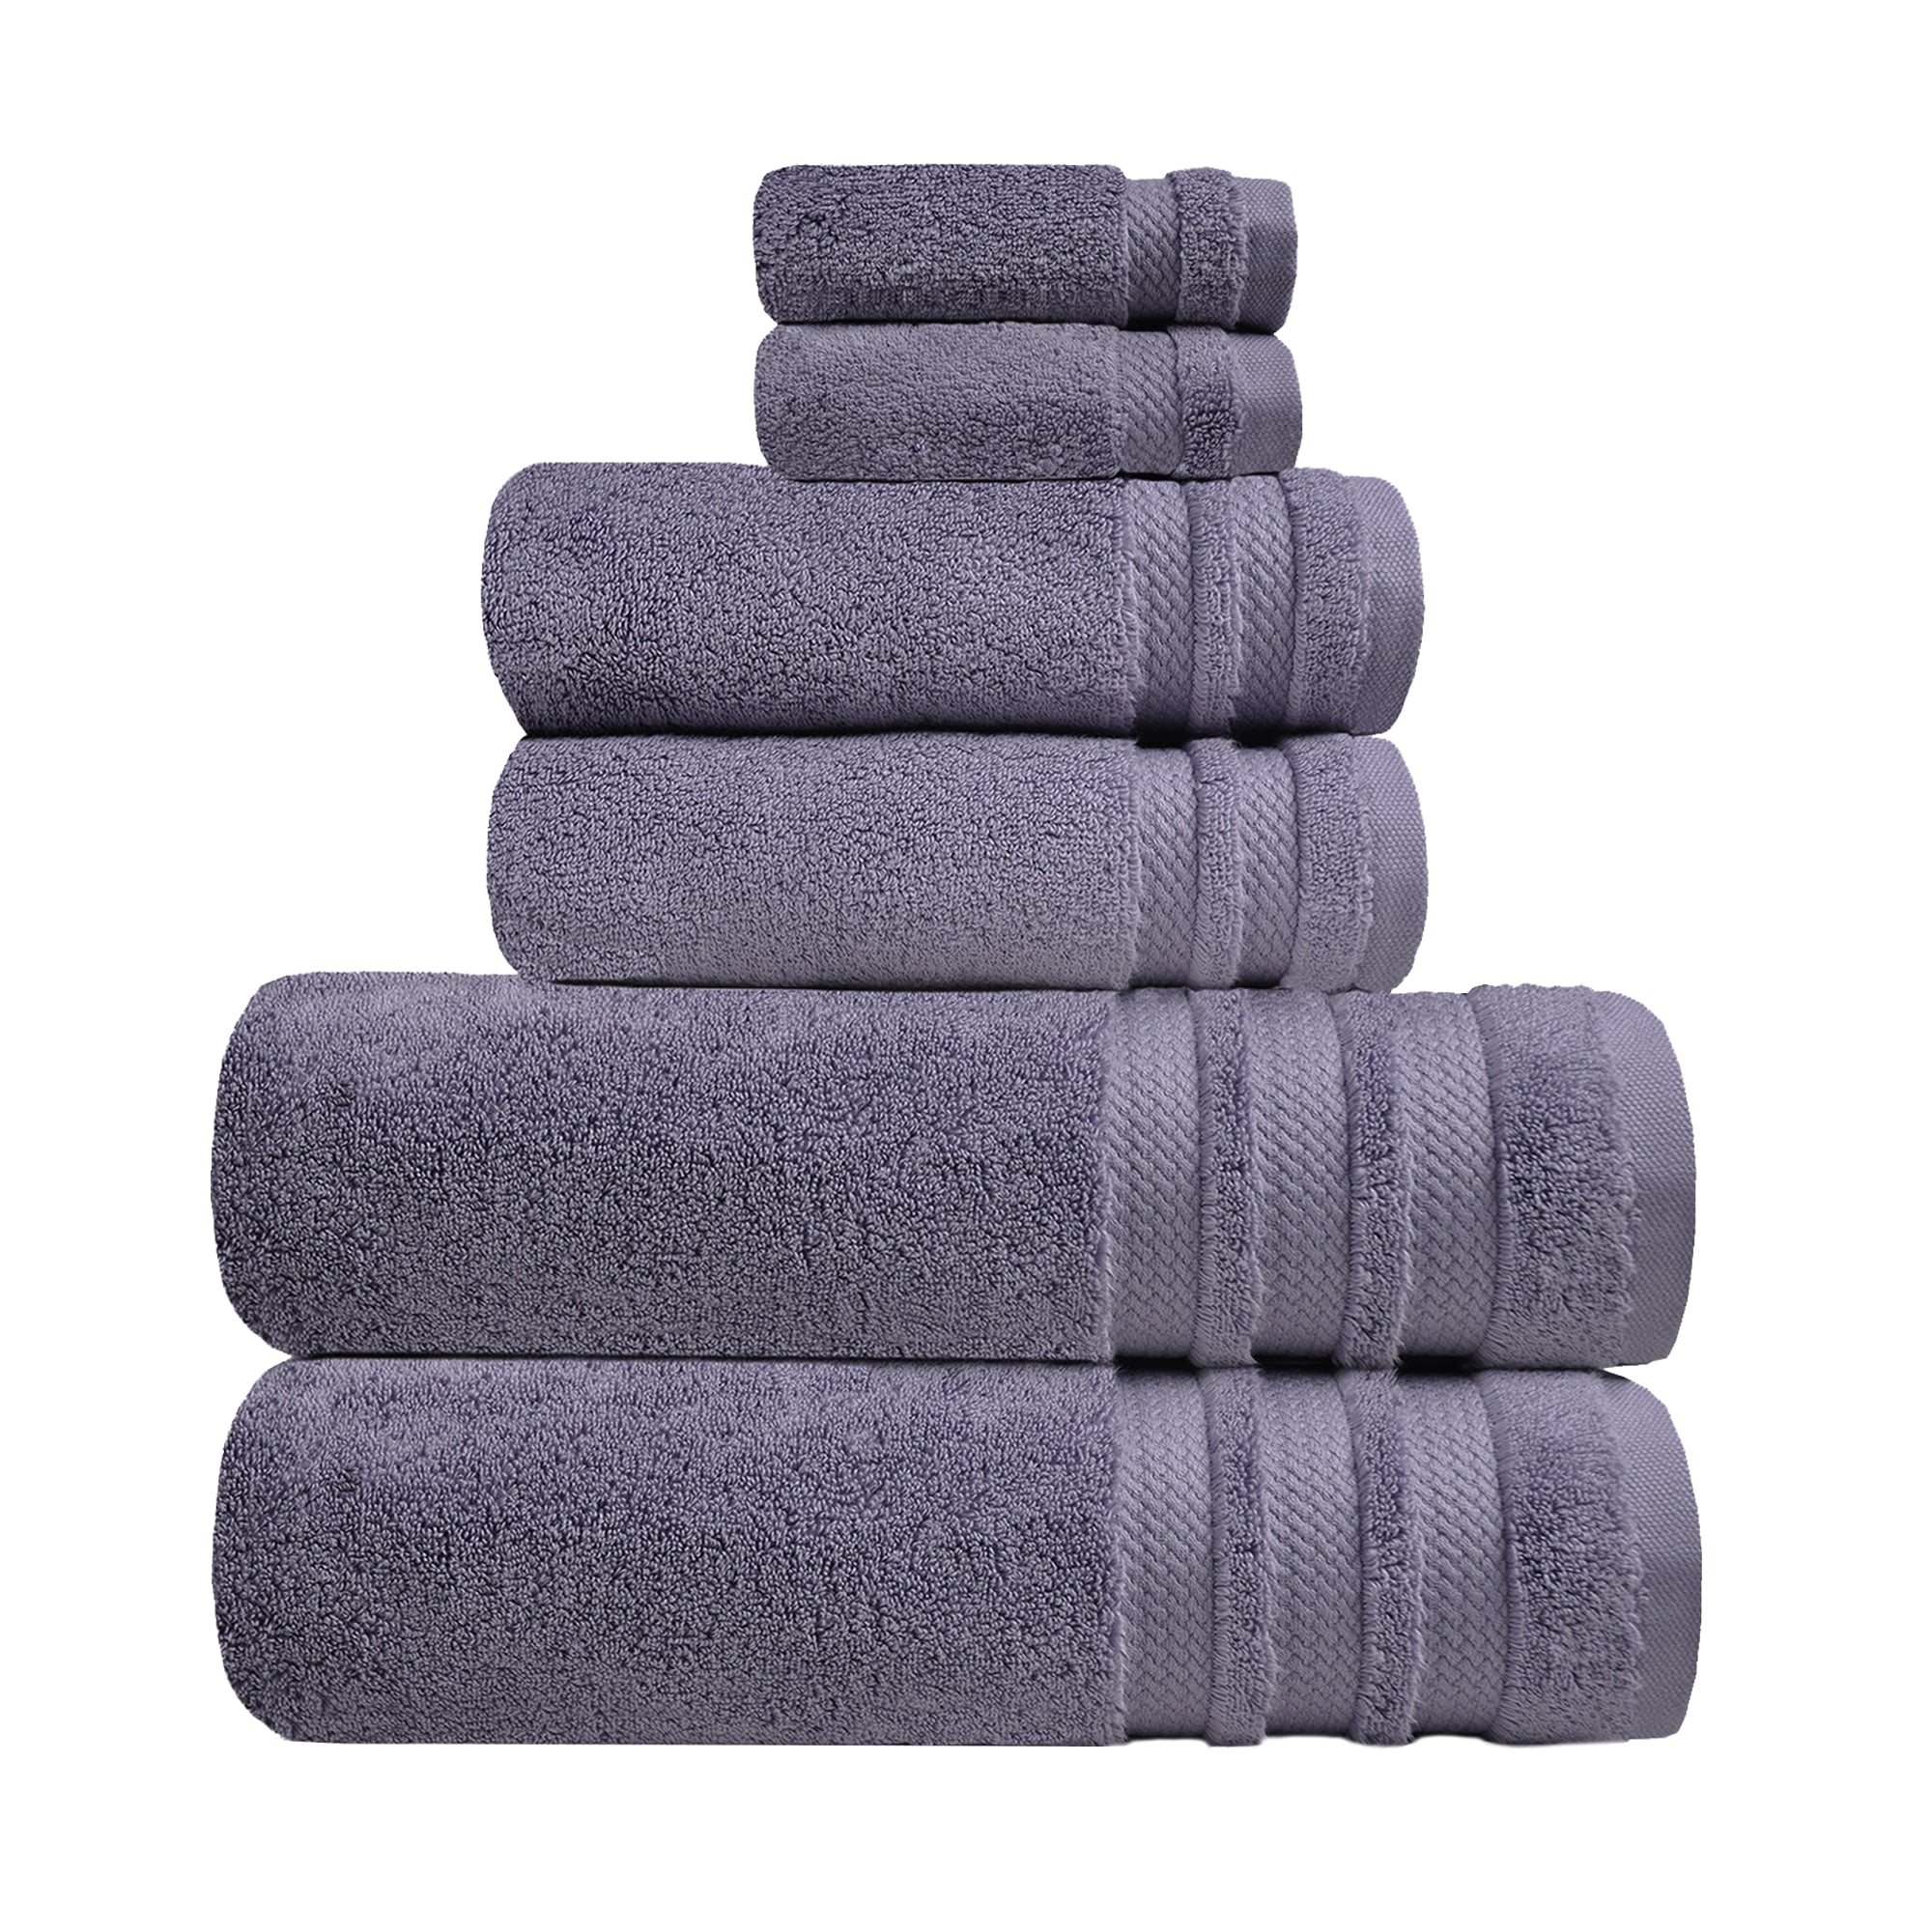 Microfiber Dual Scrubbing and Terry Towel (600 gsm, 16 in. x 16 in.)